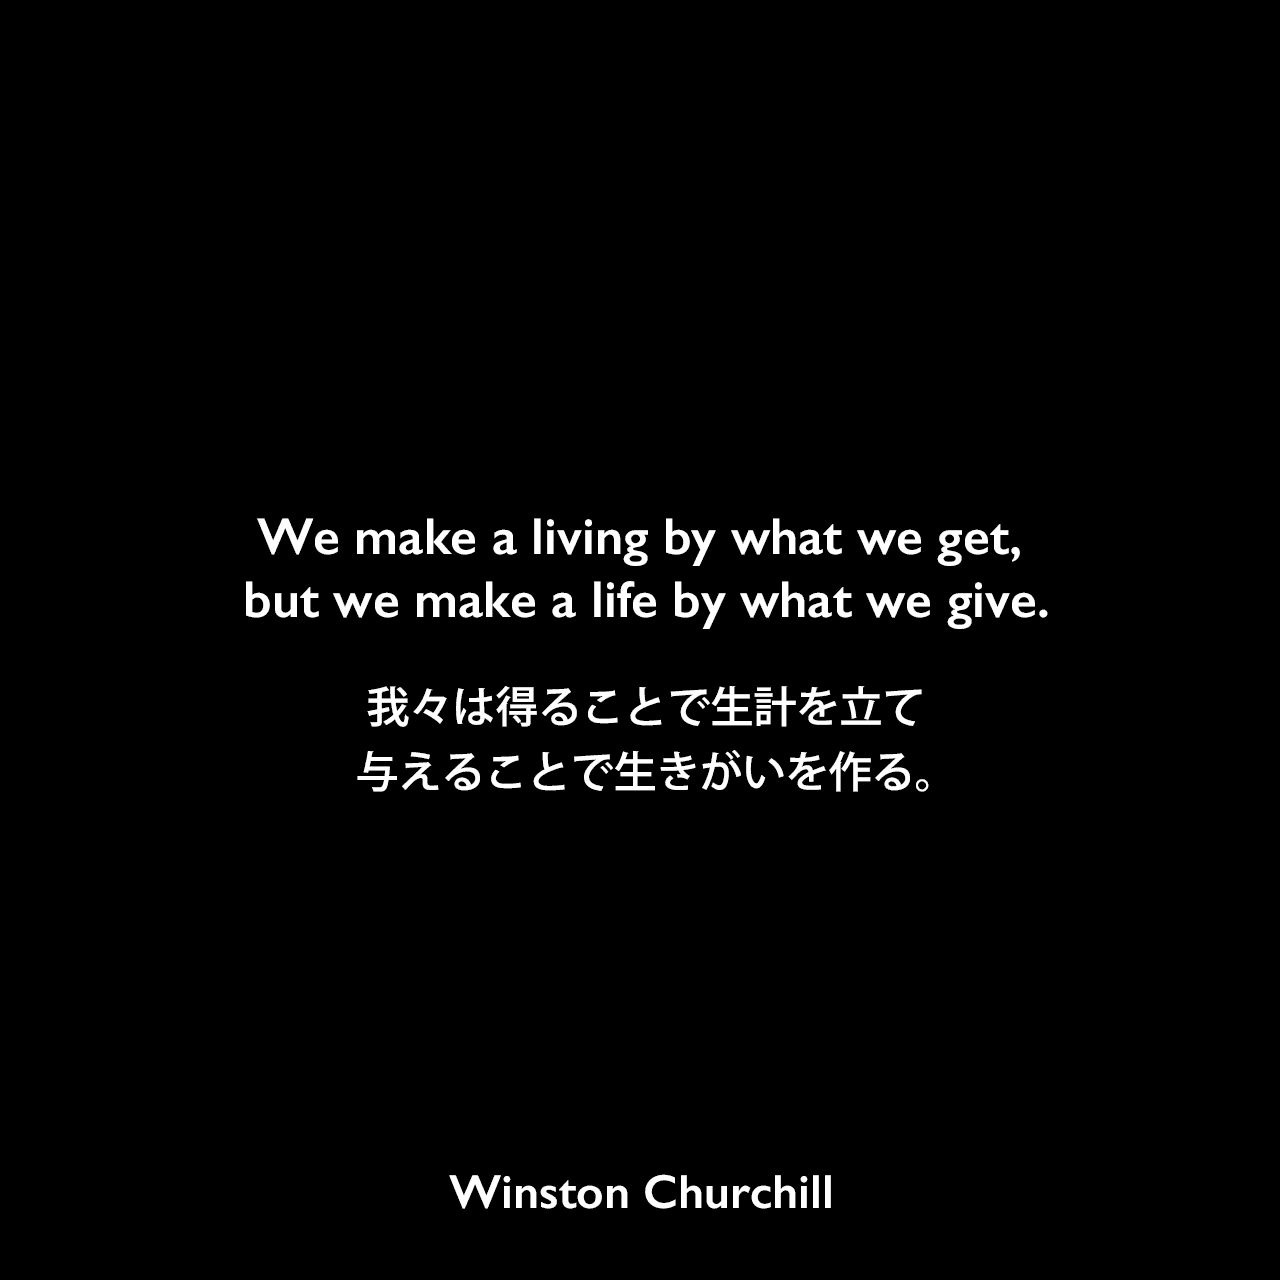 We make a living by what we get, but we make a life by what we give.我々は得ることで生計を立て、与えることで生きがいを作る。